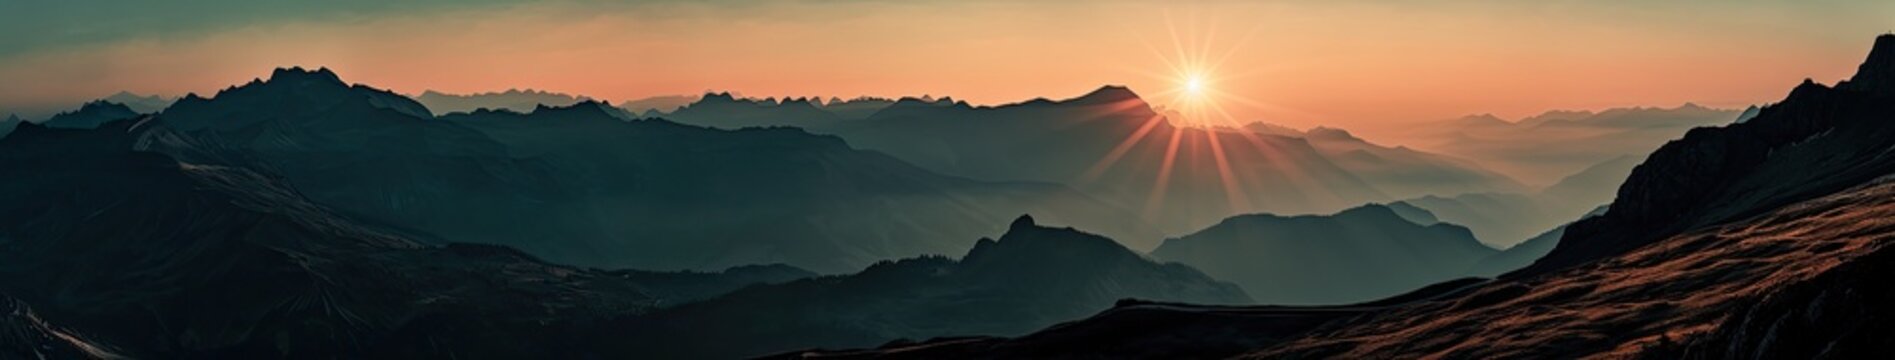 The sun is rising over a mountain range